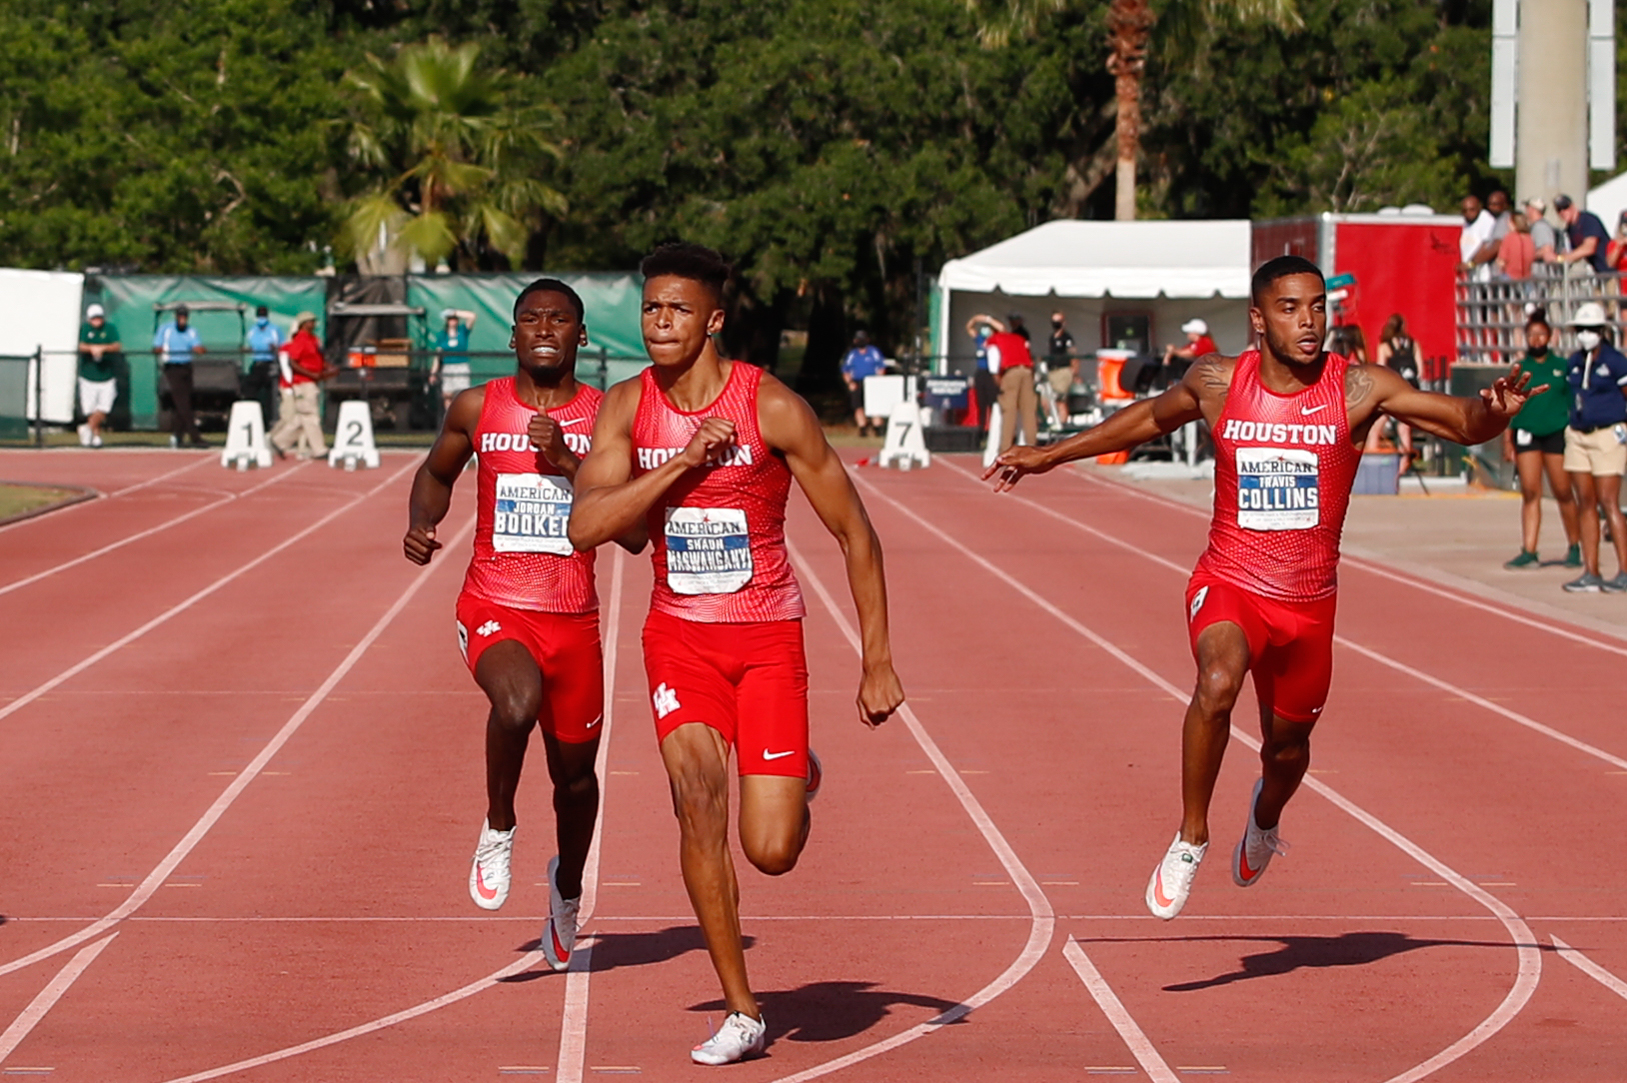 UH sophomore Shaun Maswanganyi won the men's 200-meter with a time of 21.20 at the Leonard Hilton Memorial Invitational on Friday. | Courtesy of UH athletics